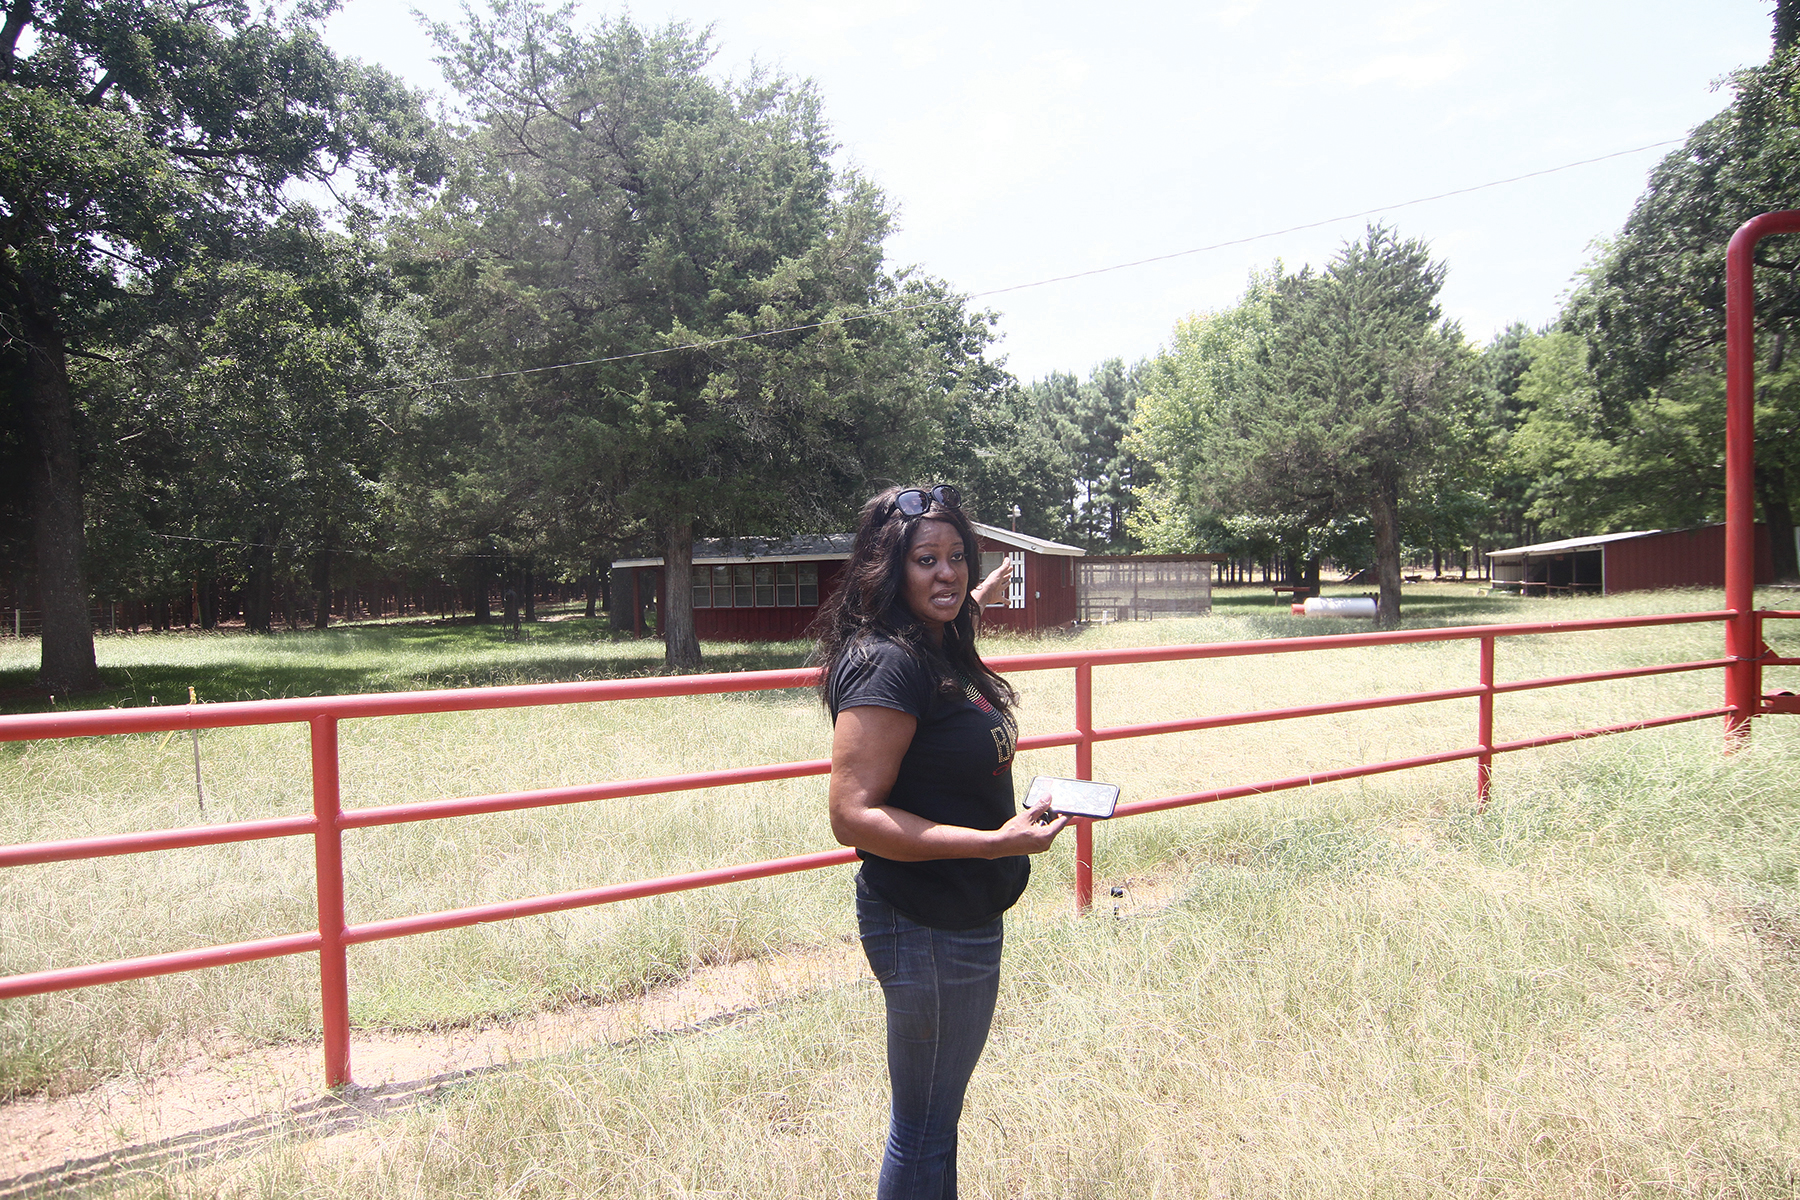 At least once a year, Hollie-Jawaid visits the red farmhouse on land where she believes she'll find the remains of victims of the Slocum massacre.